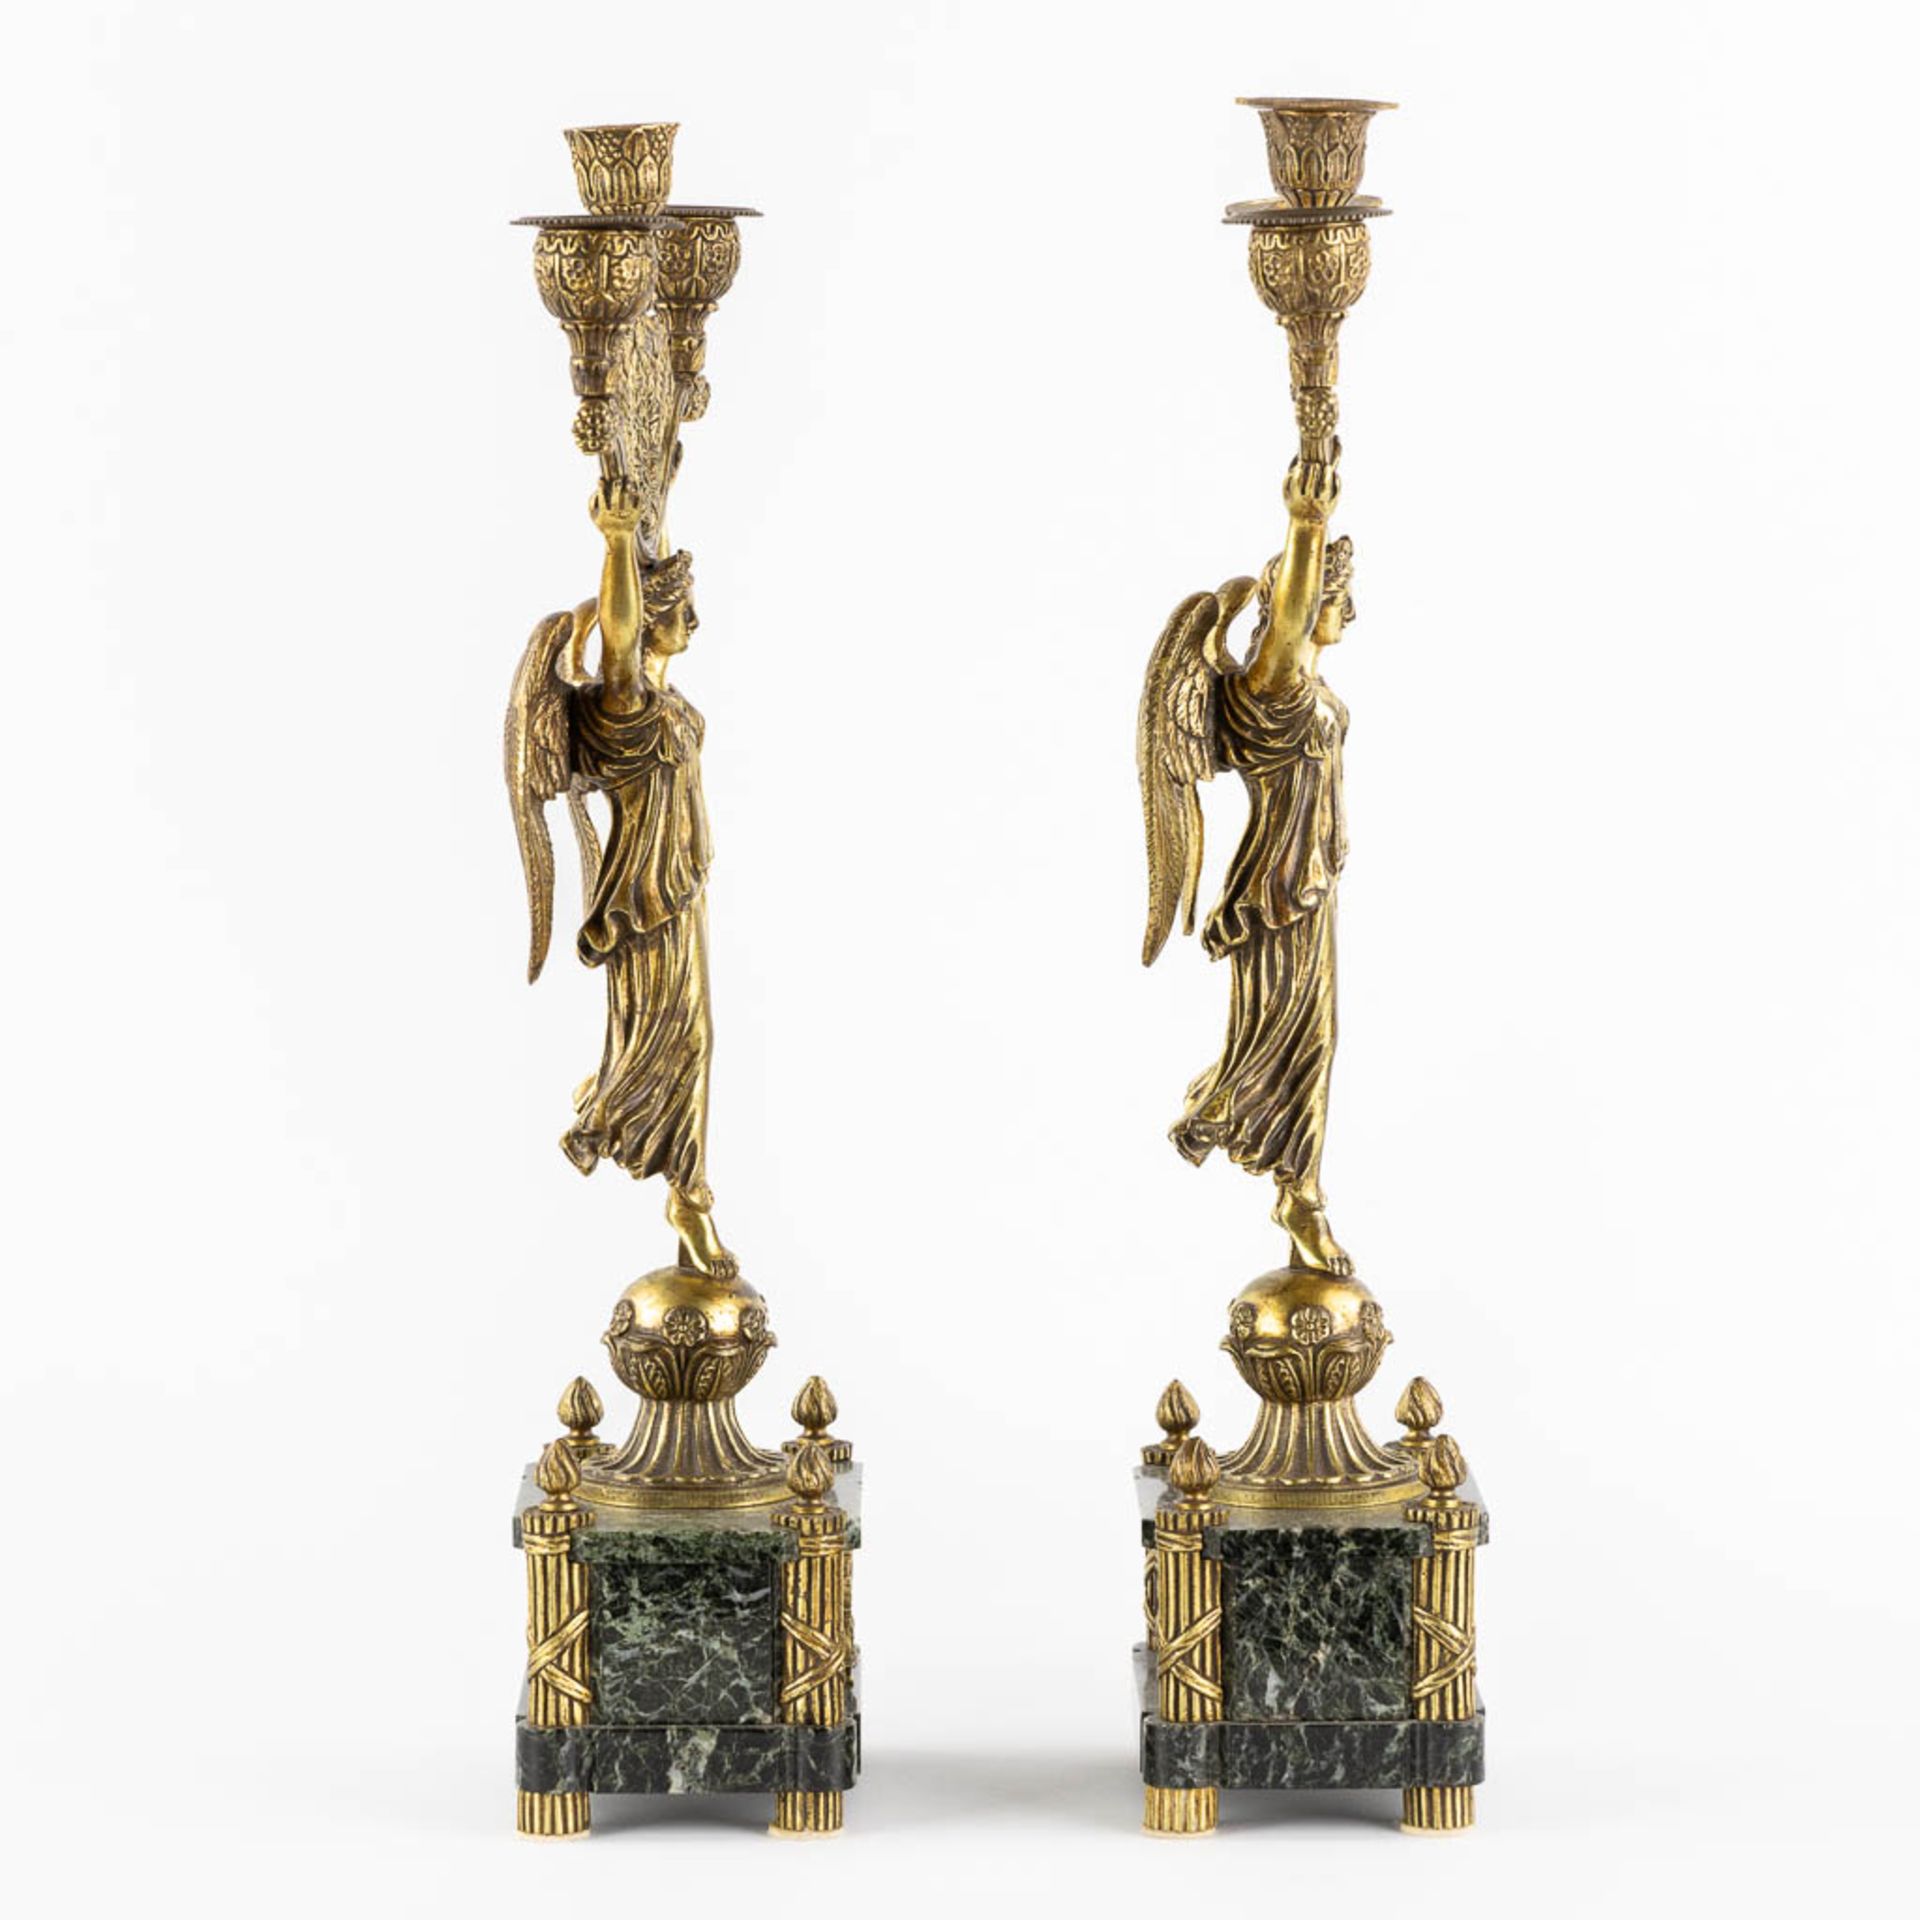 Two pairs of candelabra, bronze and cloisonné, Empire and Louis XVI style. (H:49 x D:26 cm) - Bild 11 aus 18